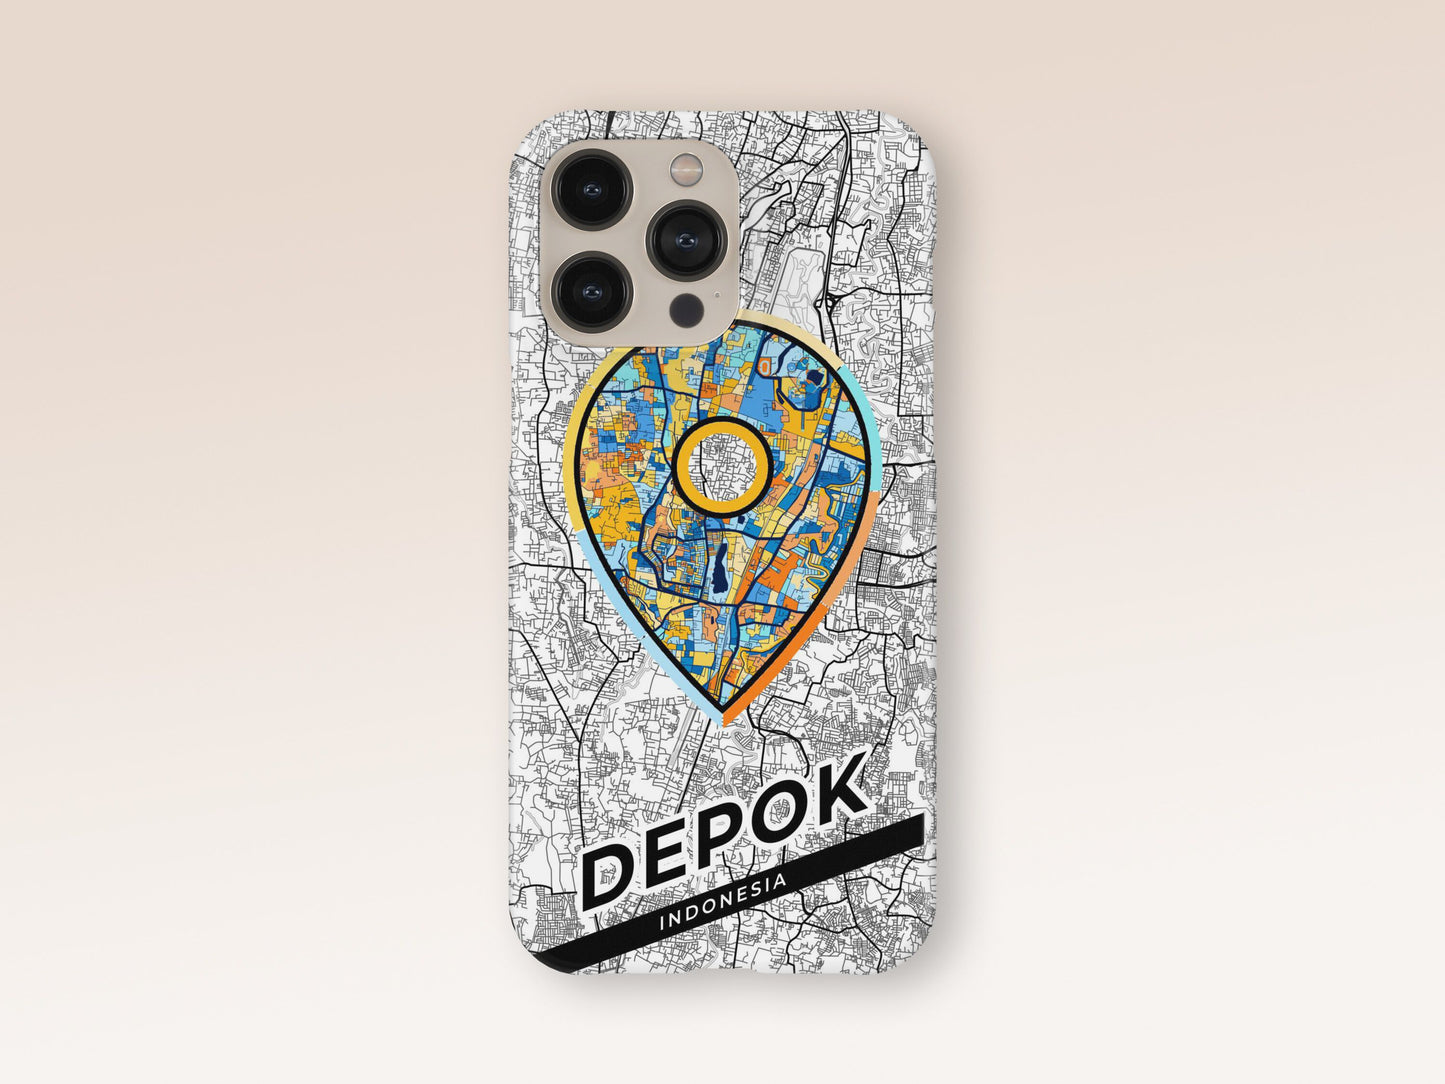 Depok Indonesia slim phone case with colorful icon. Birthday, wedding or housewarming gift. Couple match cases. 1